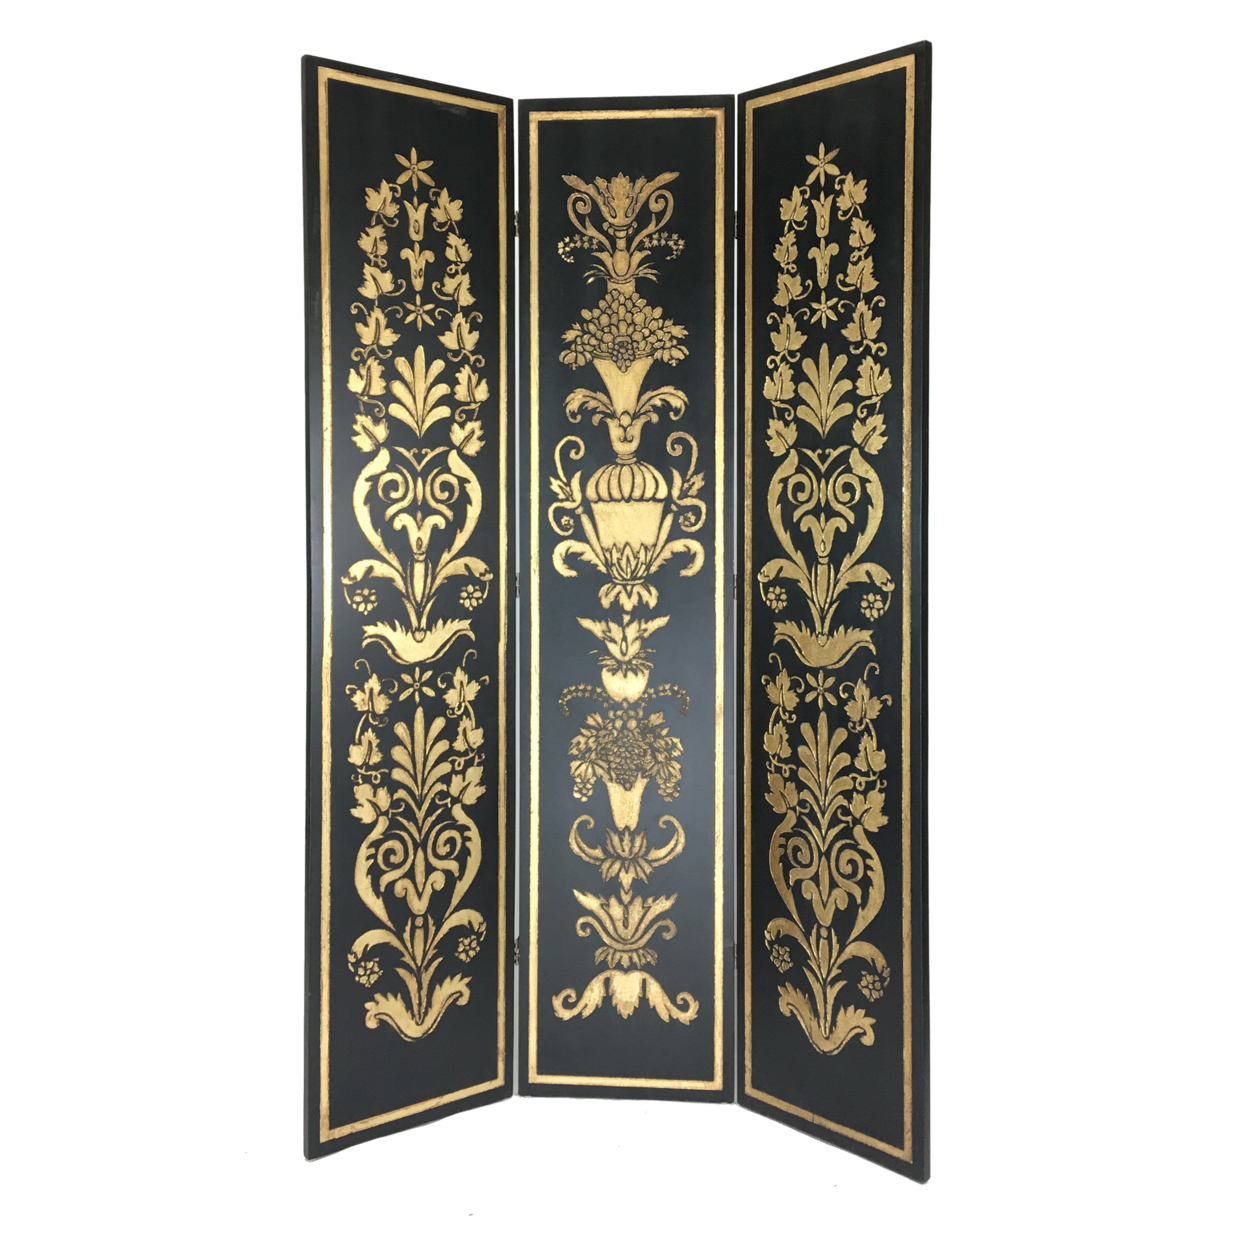 Wooden Double Sided 3 Panel Room Divider With Motifs, Multicolor- Saltoro Sherpi